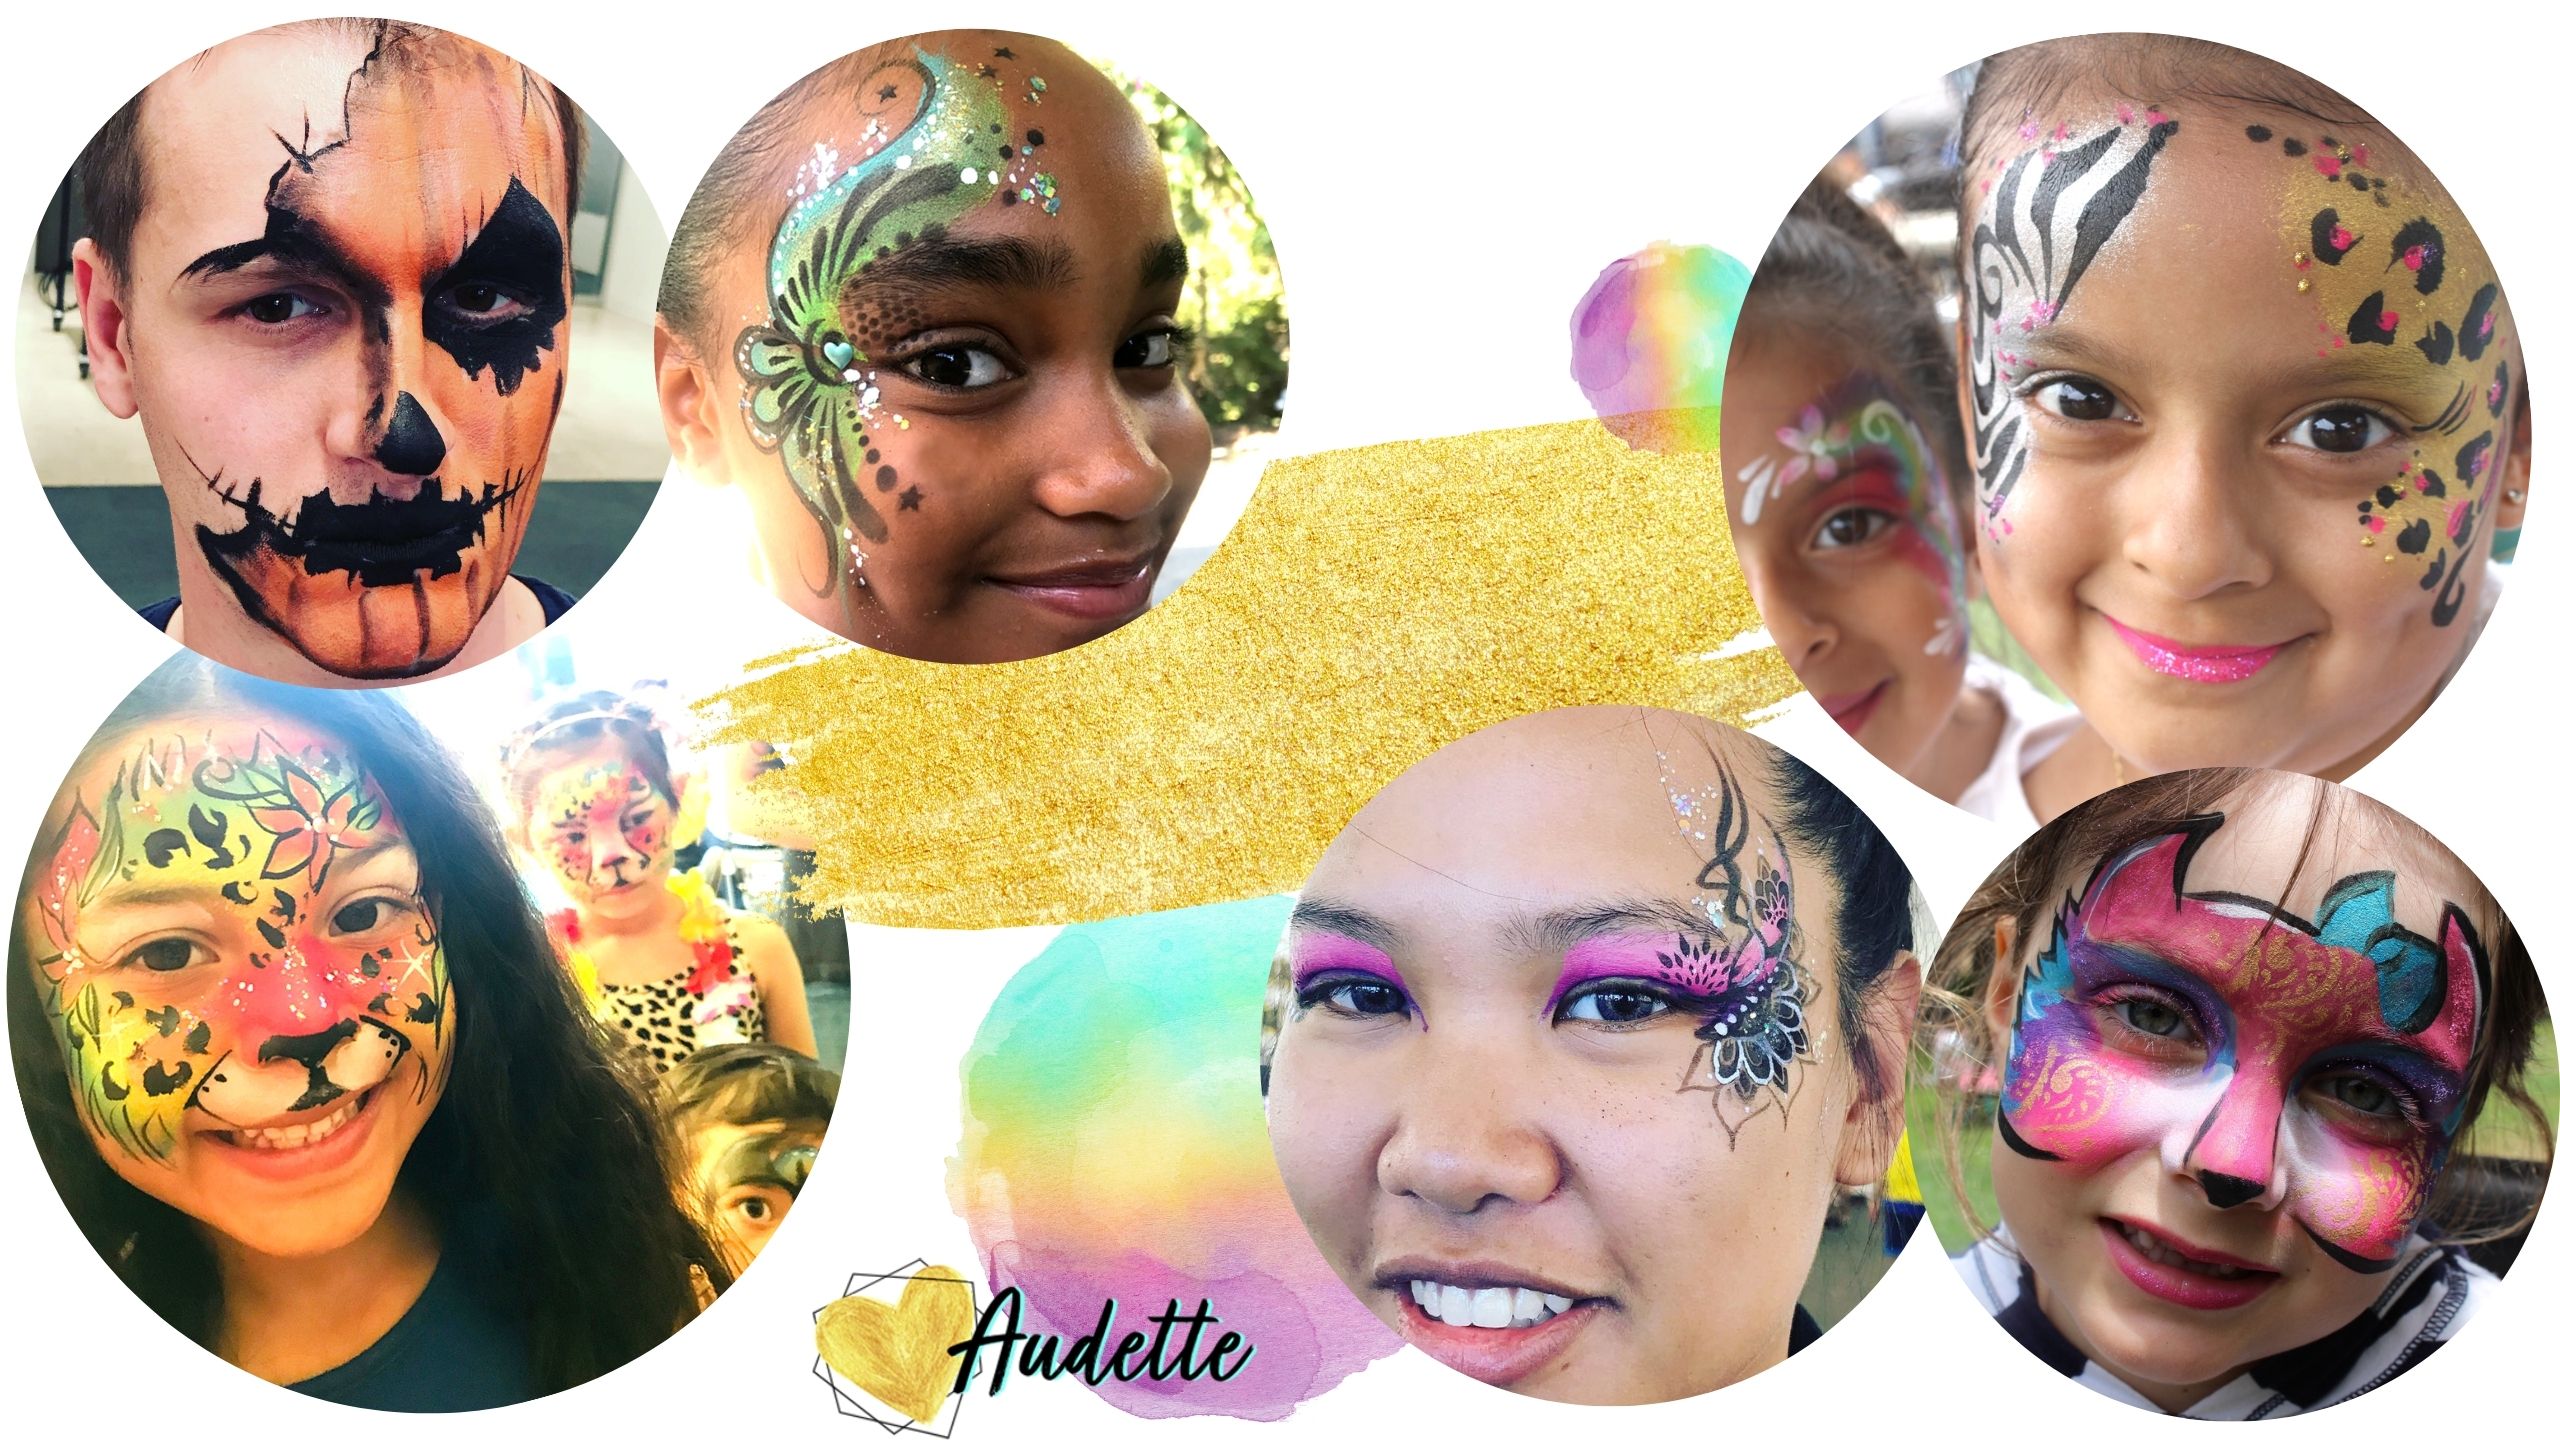 Face Paint by Audette Sophia in Sonoma County, California